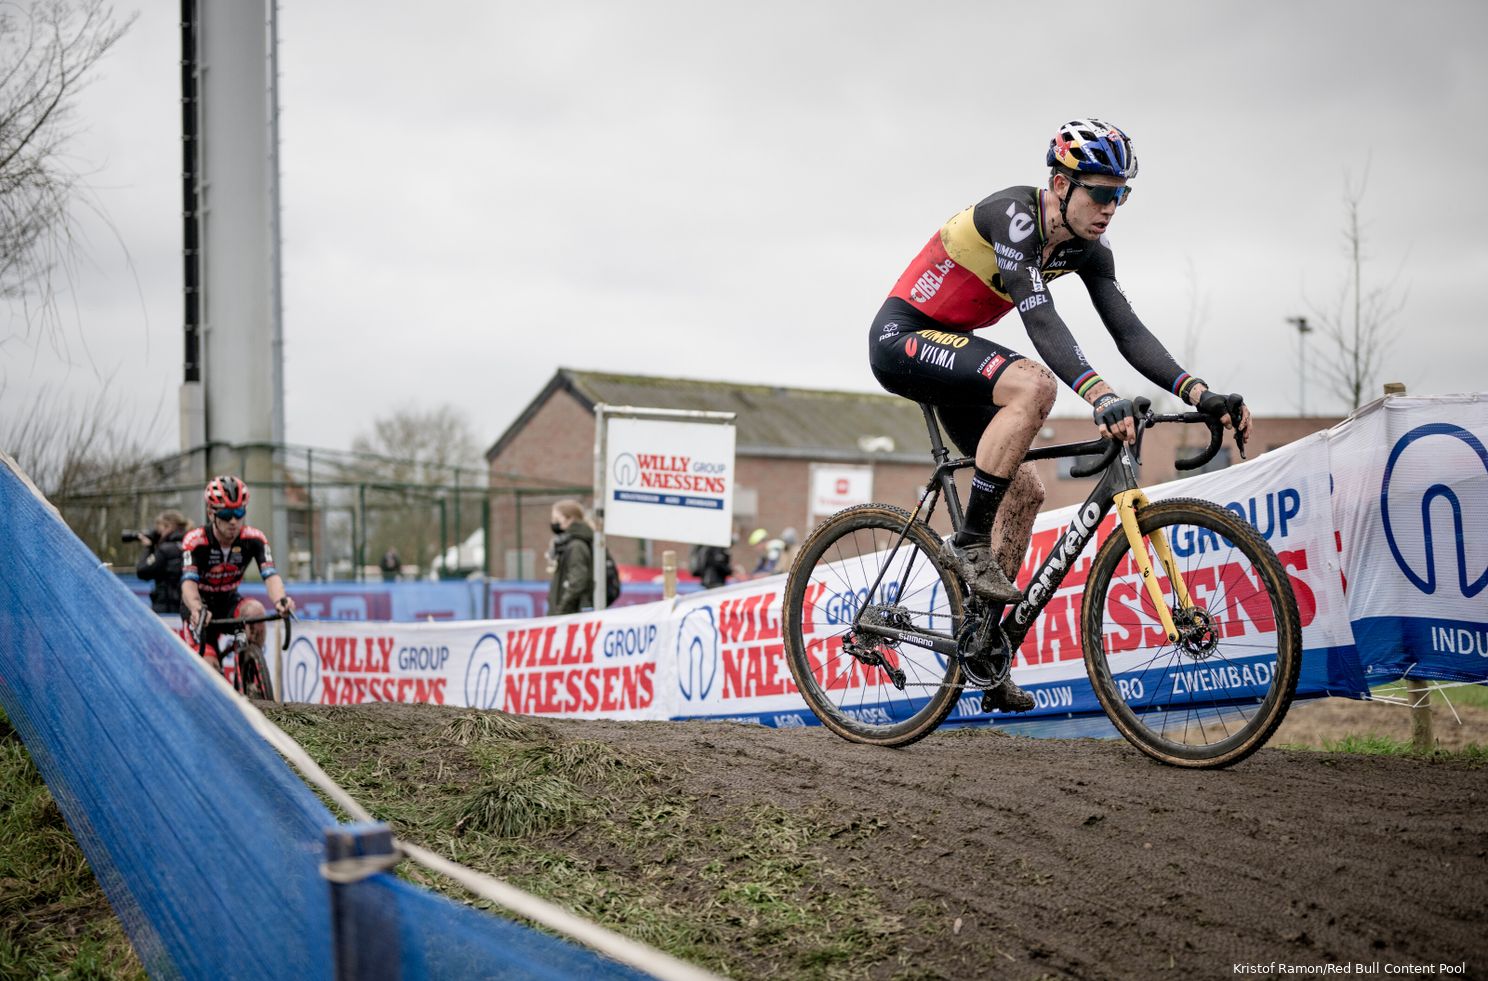 Program and Results Cyclocross Championship 2022 |  Van Sinai and Champion Corse, what next?